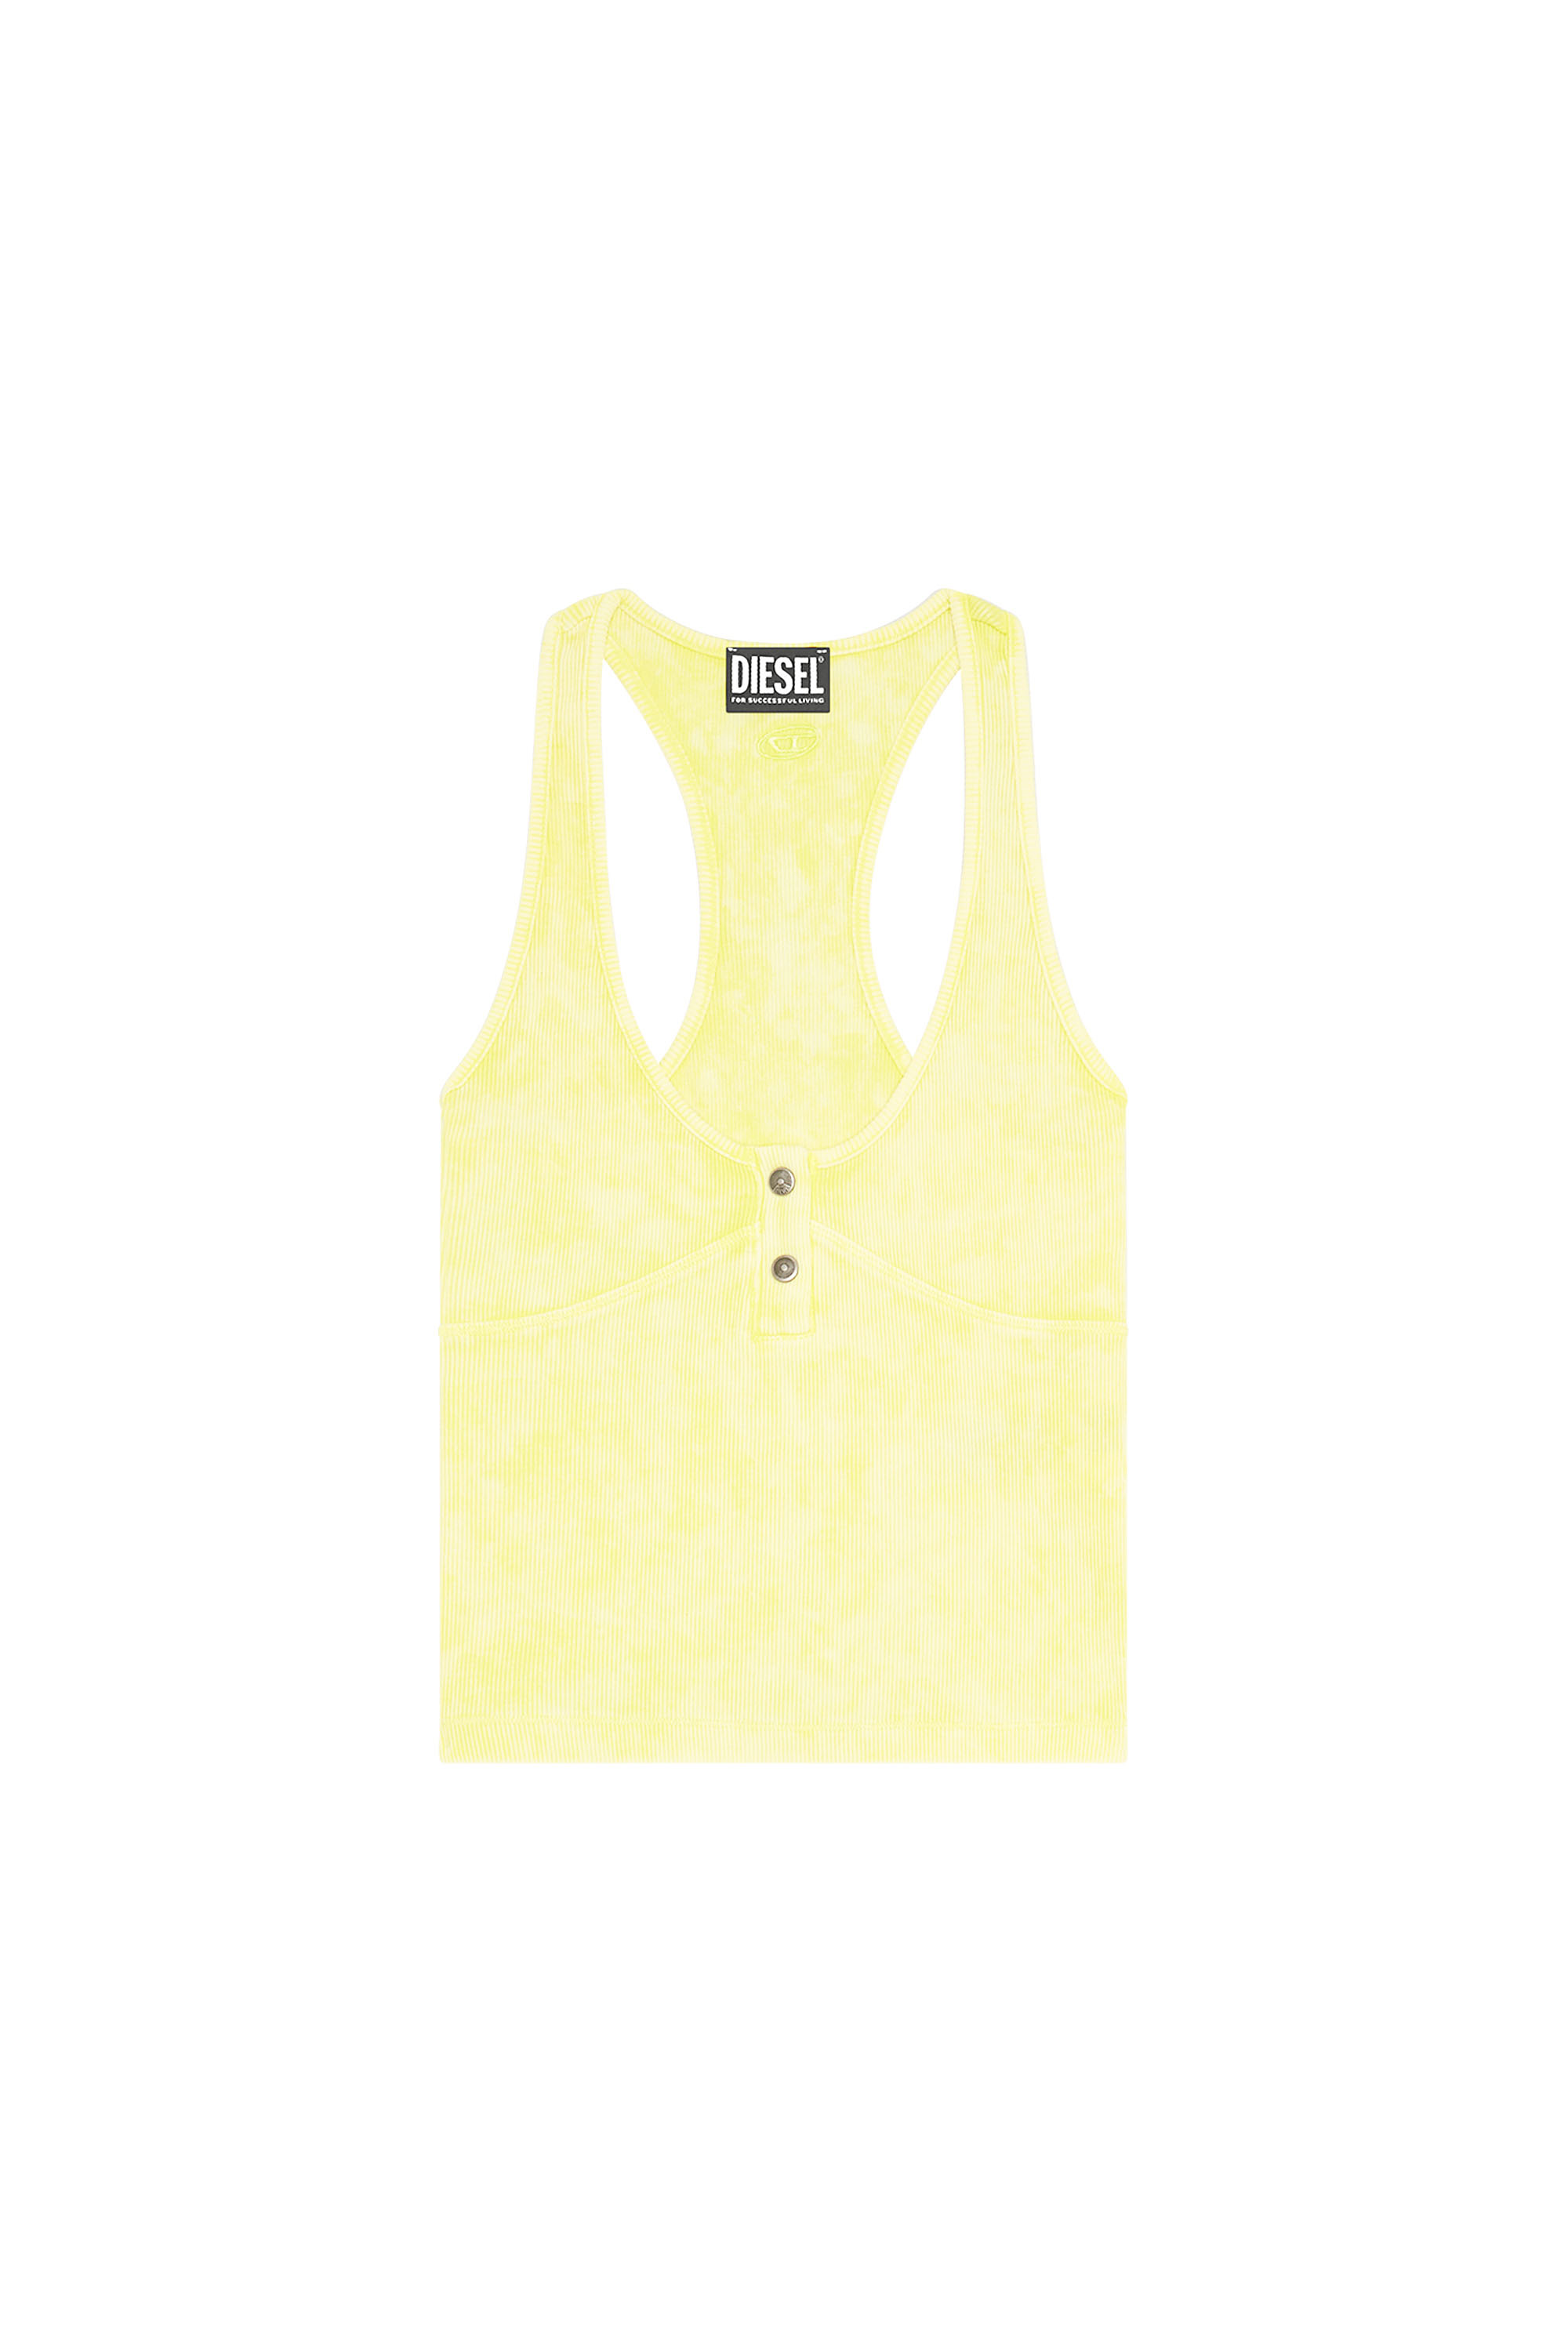 Diesel - T-ANIESSE, Giallo Fluo - Image 3